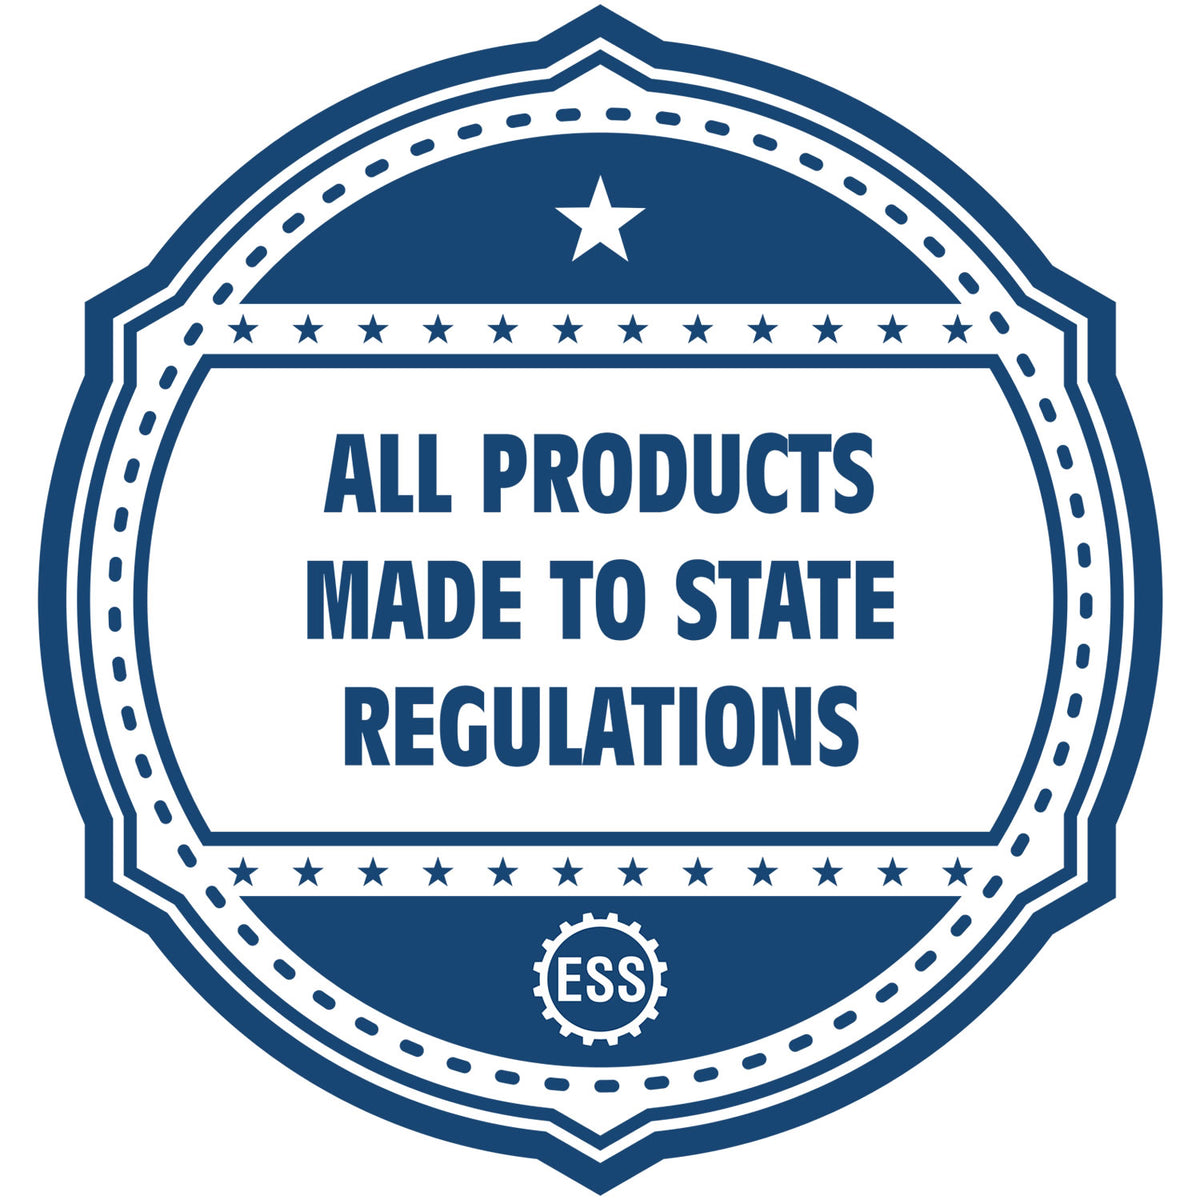 A blue icon or badge for the Gift Indiana Engineer Seal showing that this product is made in compliance with state regulations.